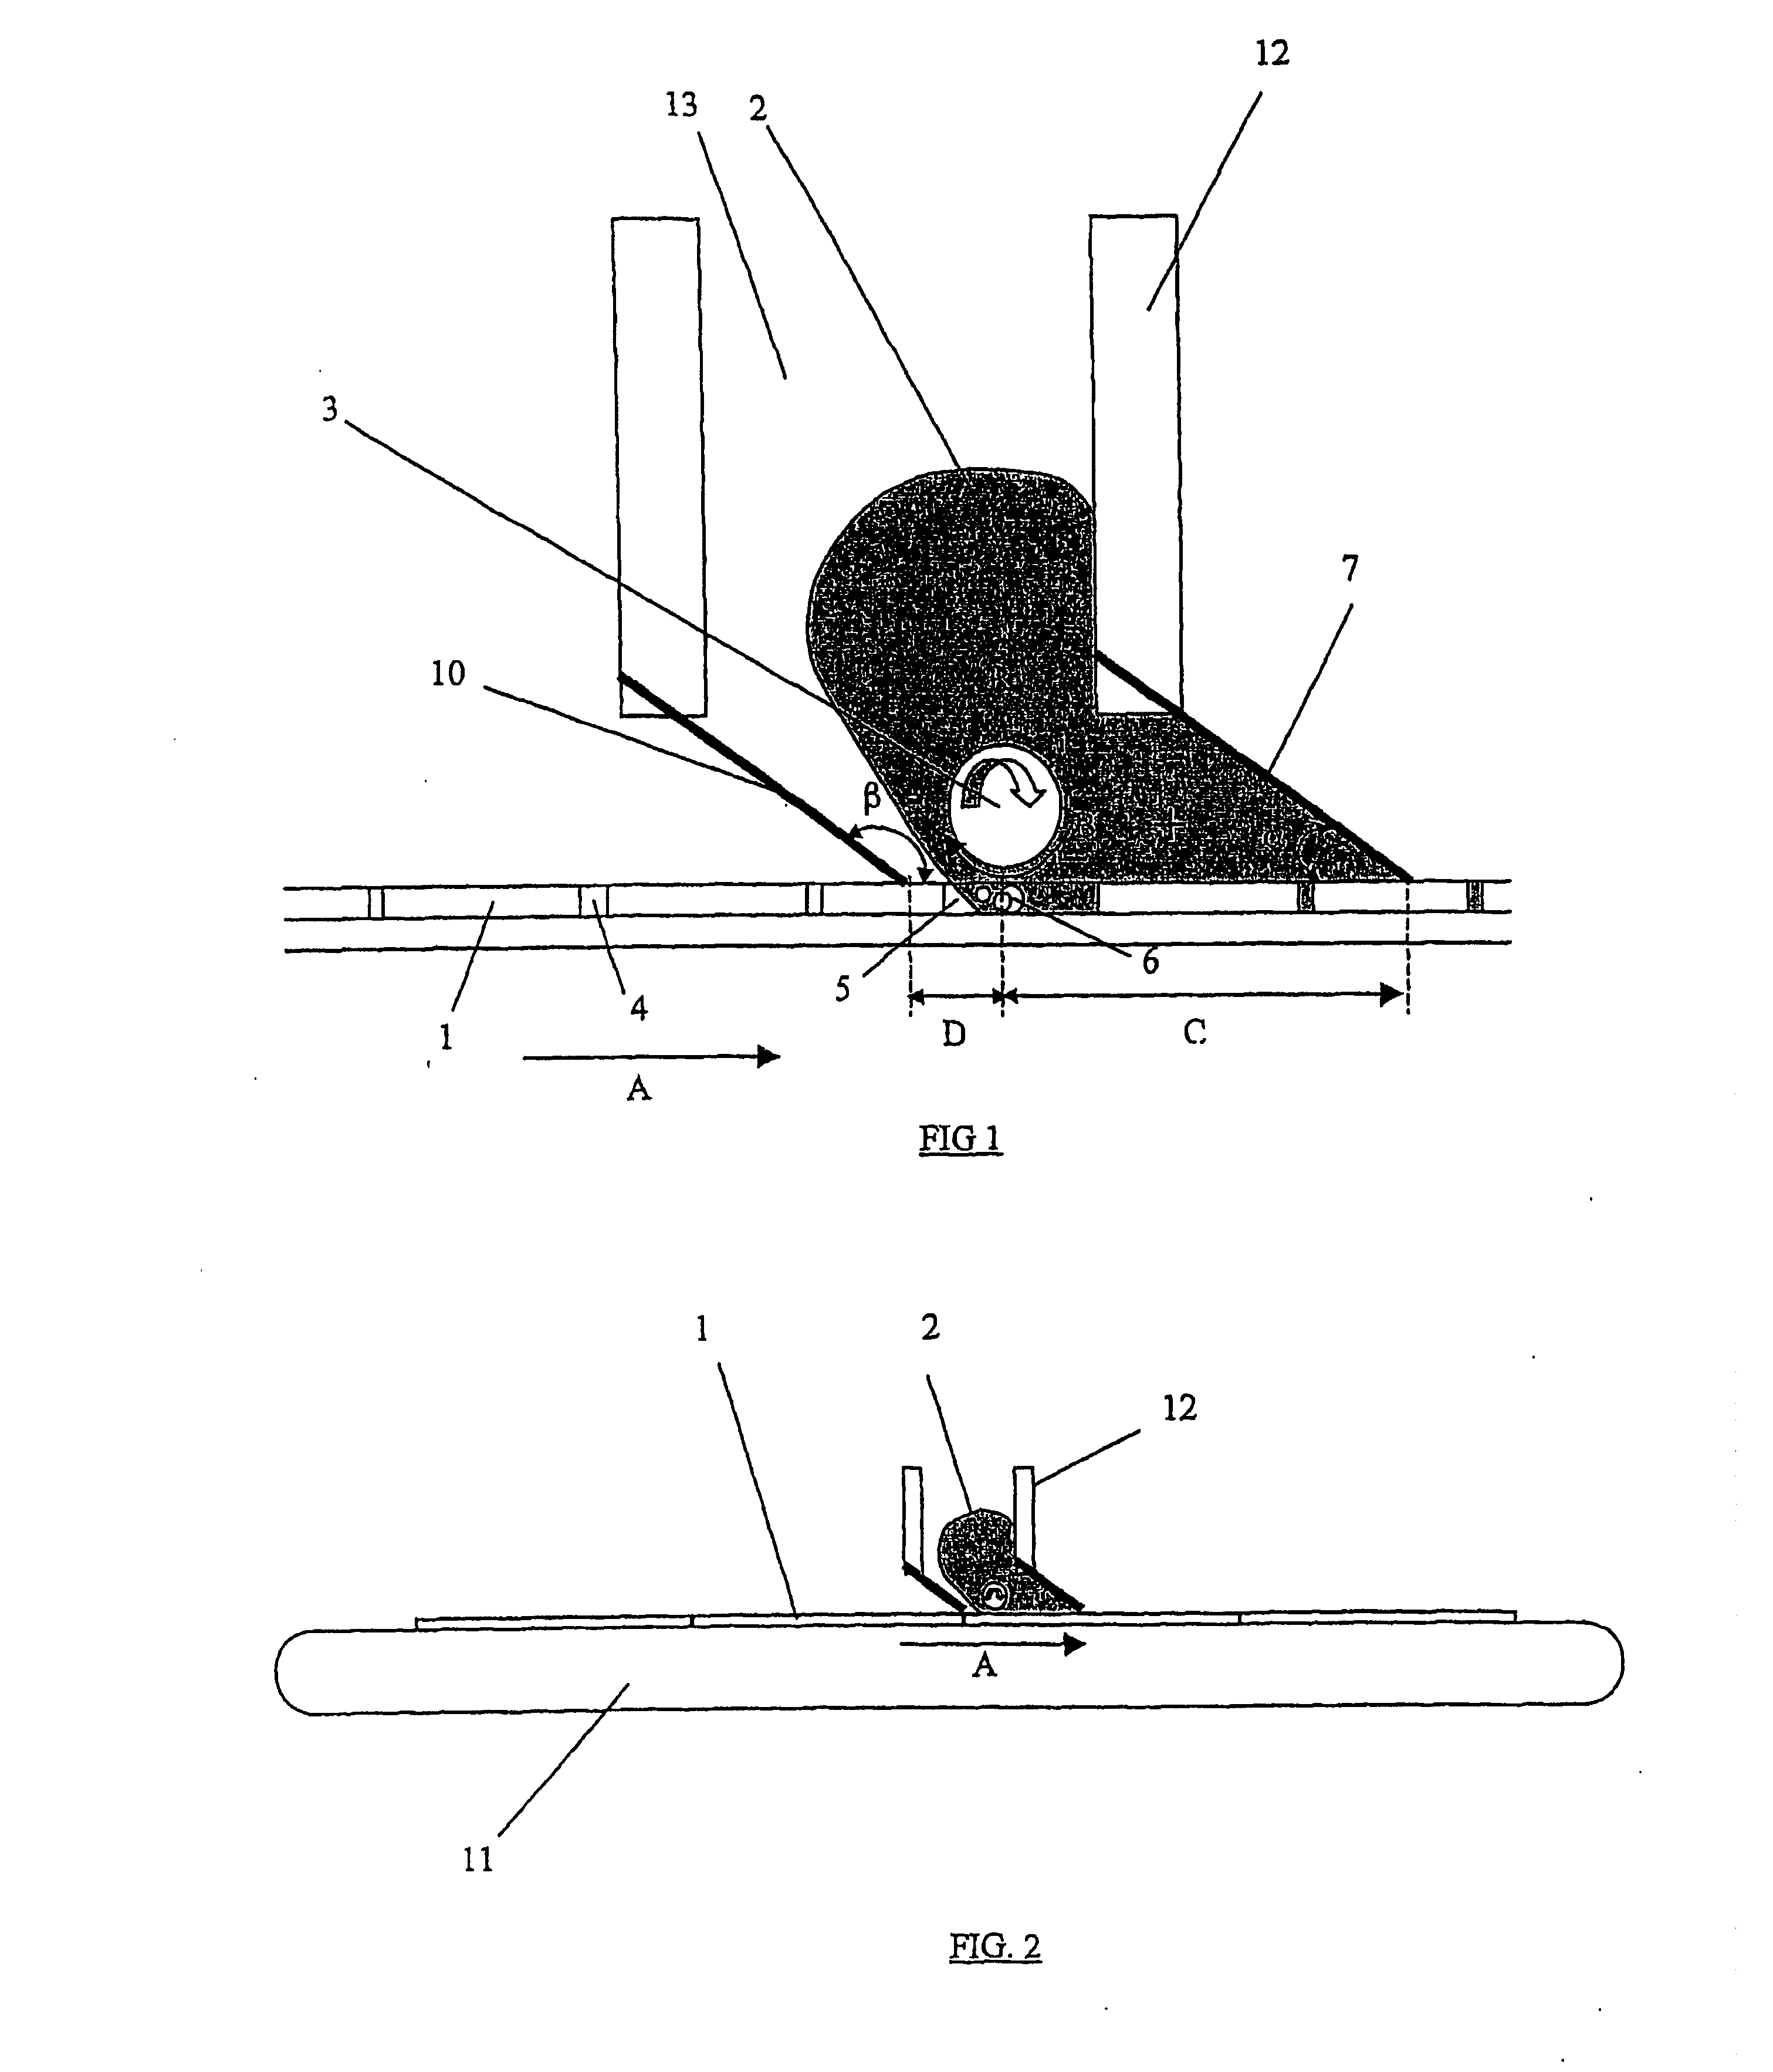 Method and device for filling zones situated in hollows or between tracks with a viscous product on a printed circuit board and apparatus using such a device